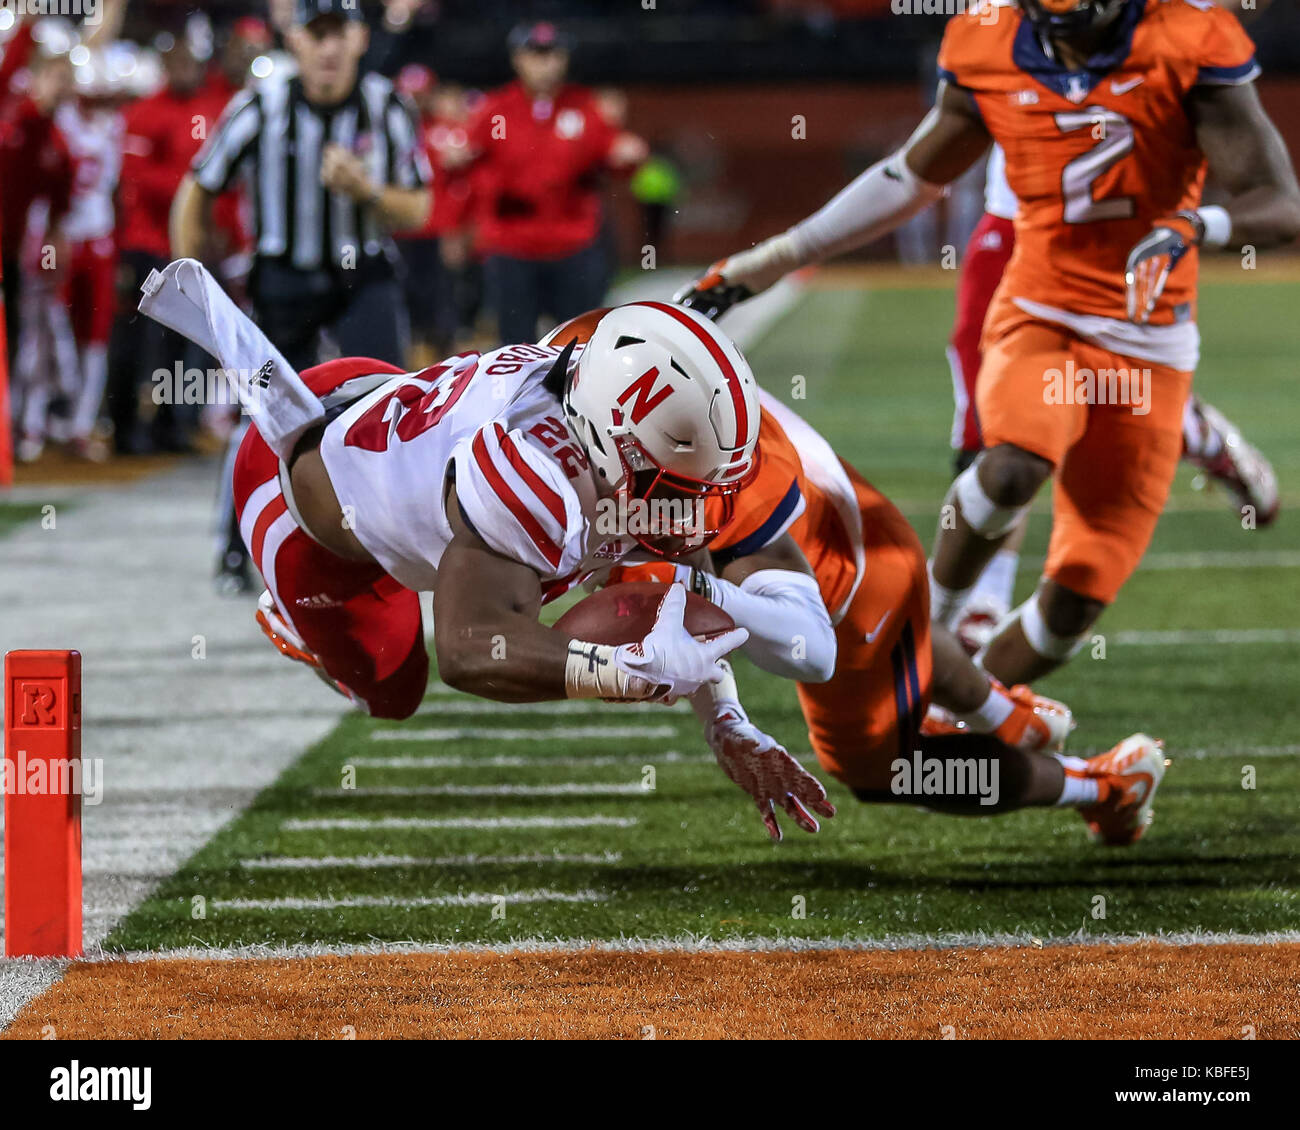 Friday September 29th - Nebraska Cornhuskers running back Devine Ozigbo (22) dives in for the touchdown in the first half during NCAA football game action between Nebraska and University of Illinois at Memorial Stadium in Champaign, IL. Stock Photo